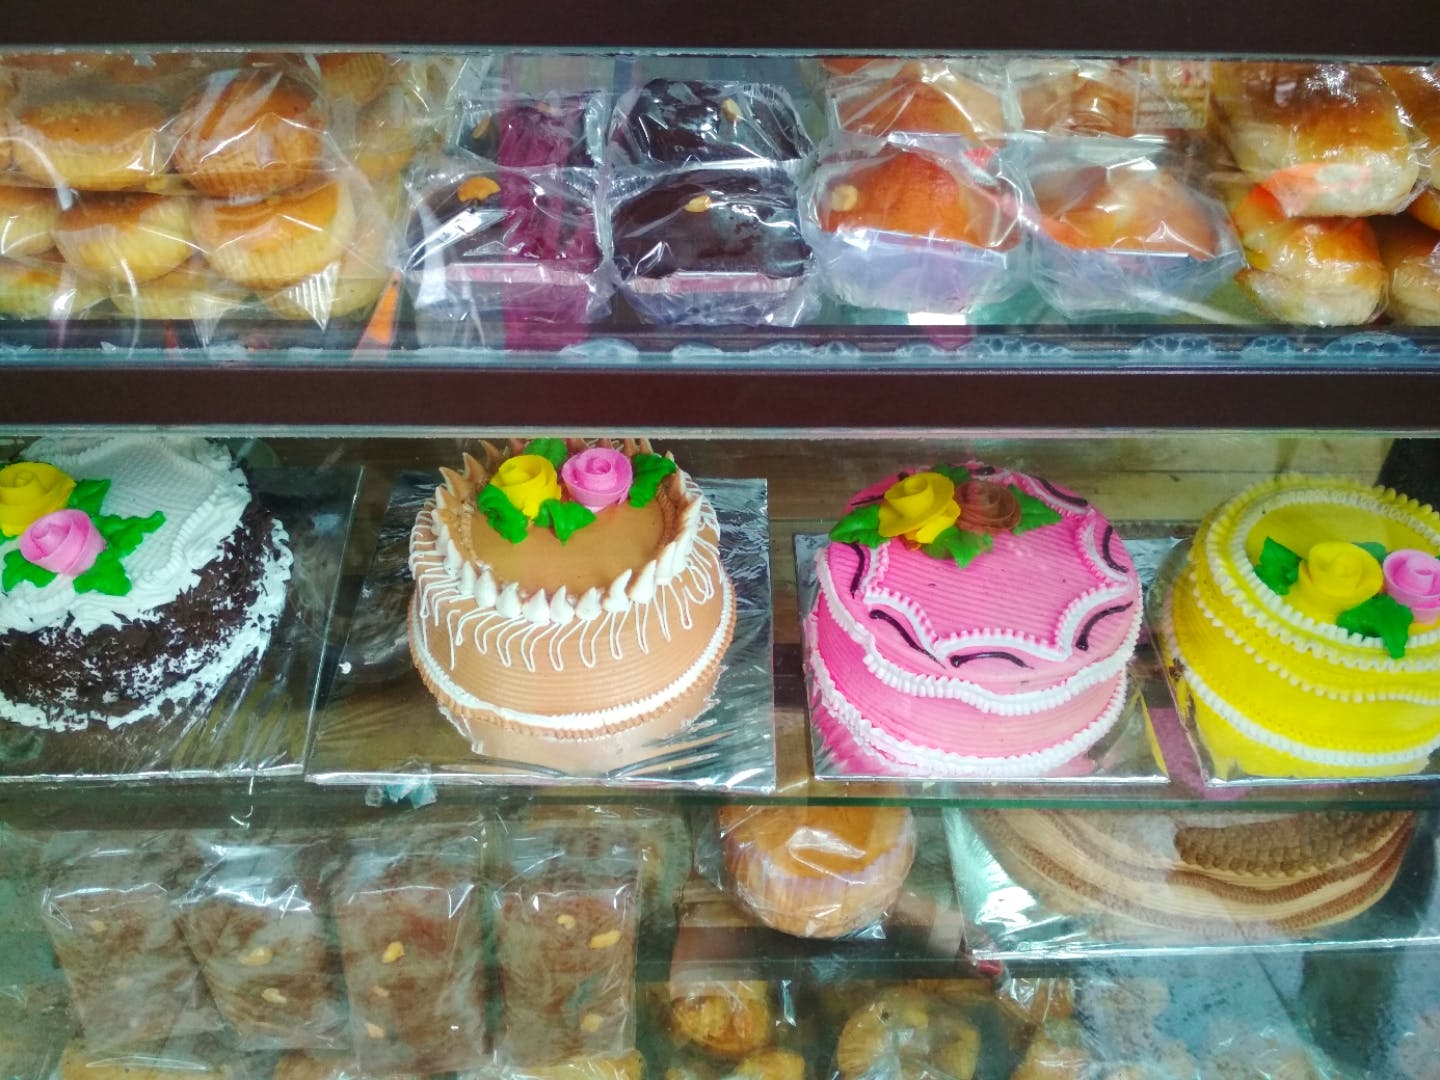 Cake Delivery At Midnight? Call This Bakery In Gurgaon